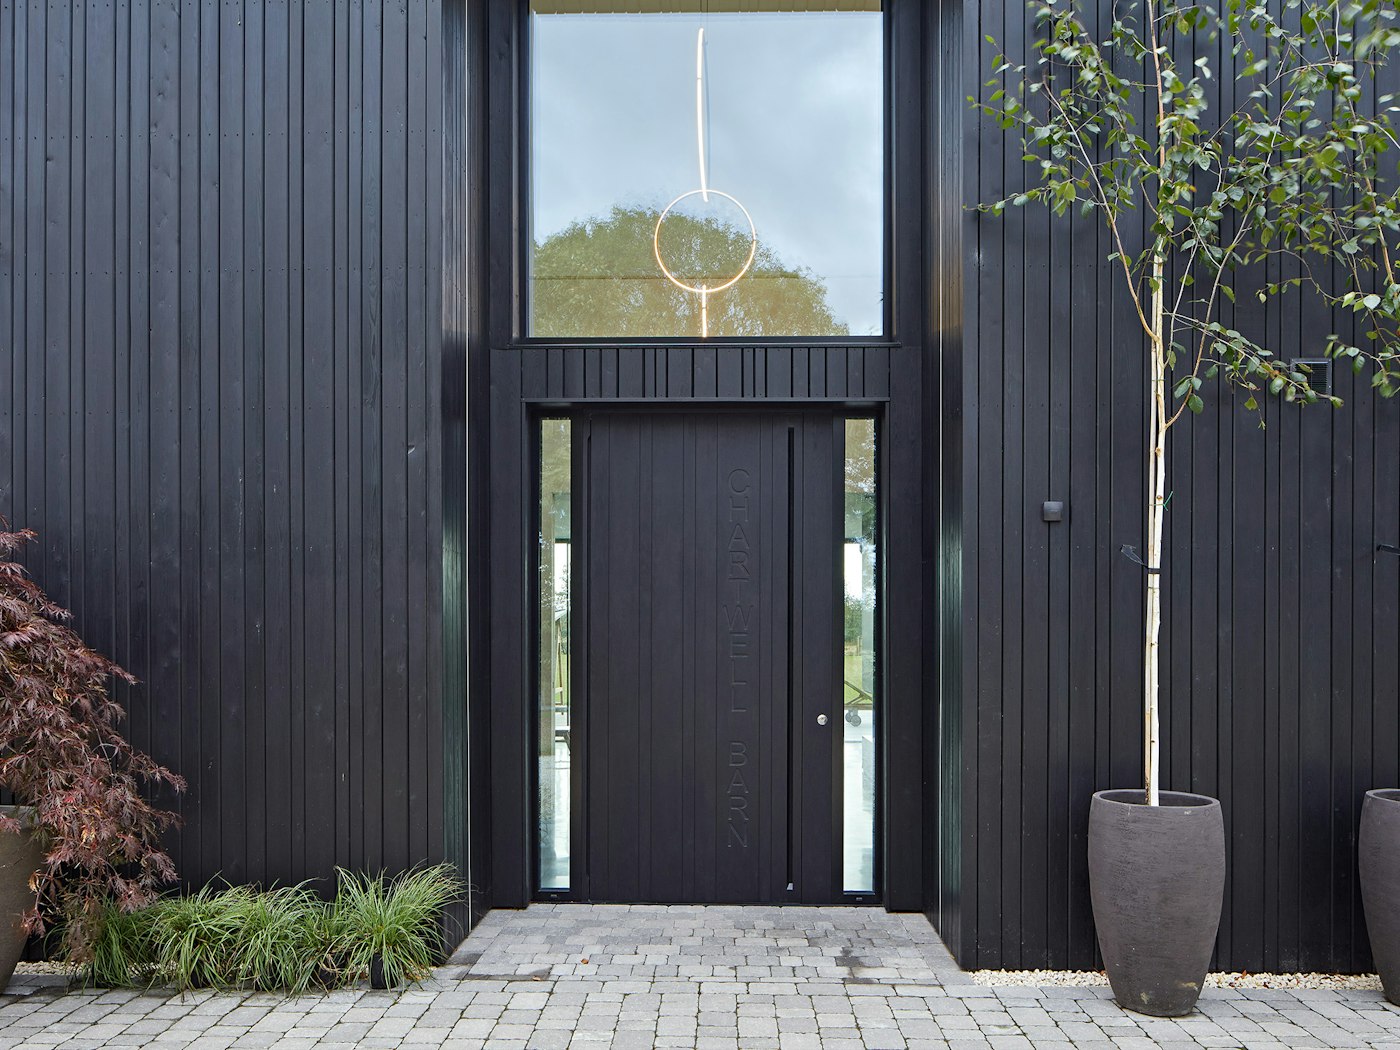 Sleek and modern, the "Chartwell Barn" project used an ebony-oiled oak wood door to match to the exterior cladding